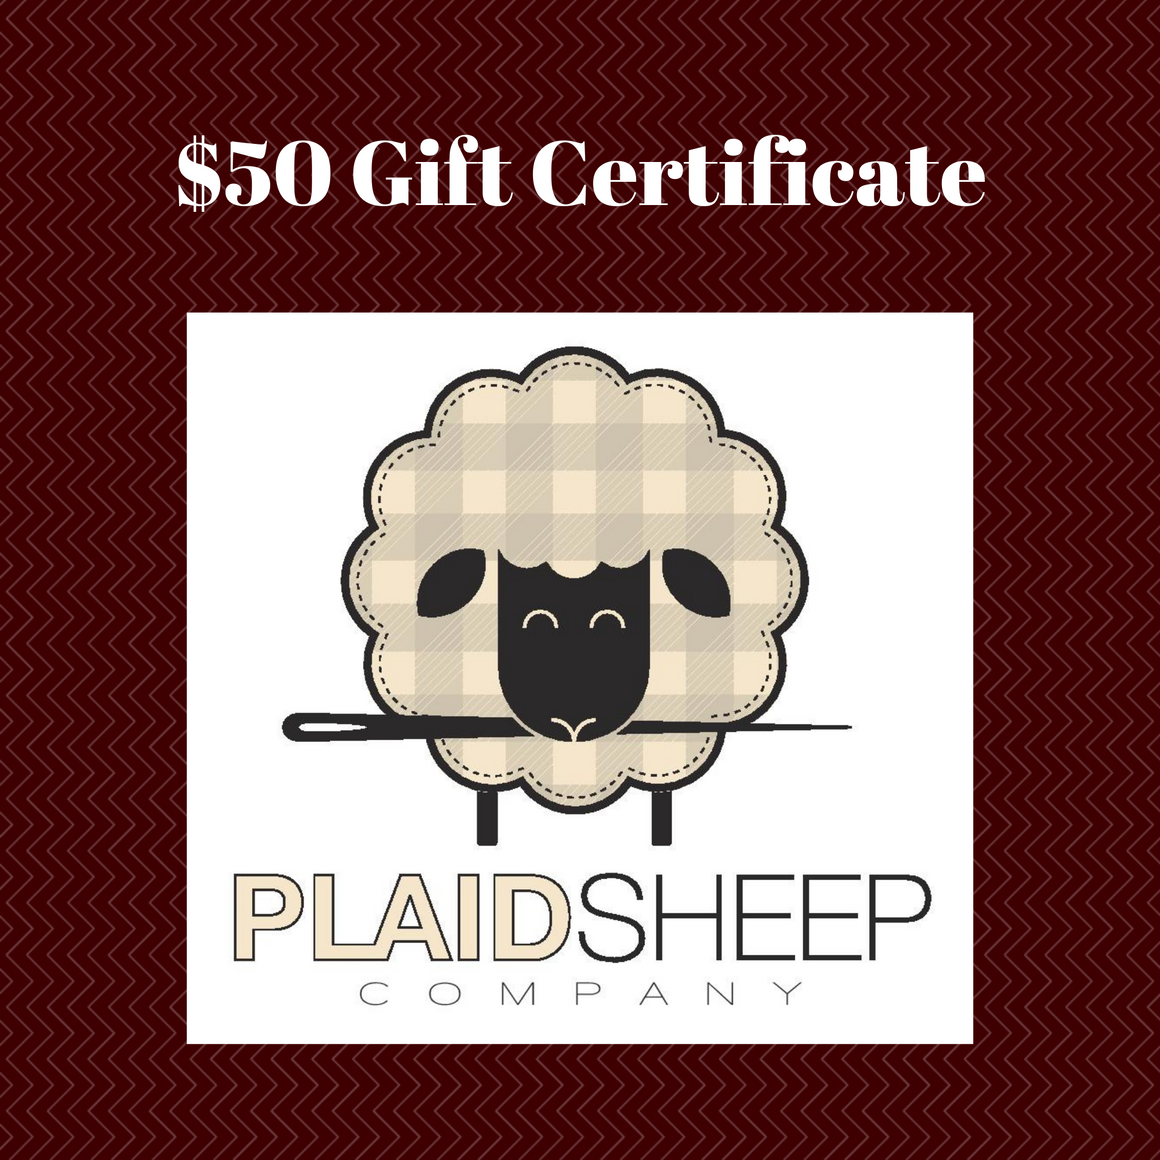 Gift Certificates: $50